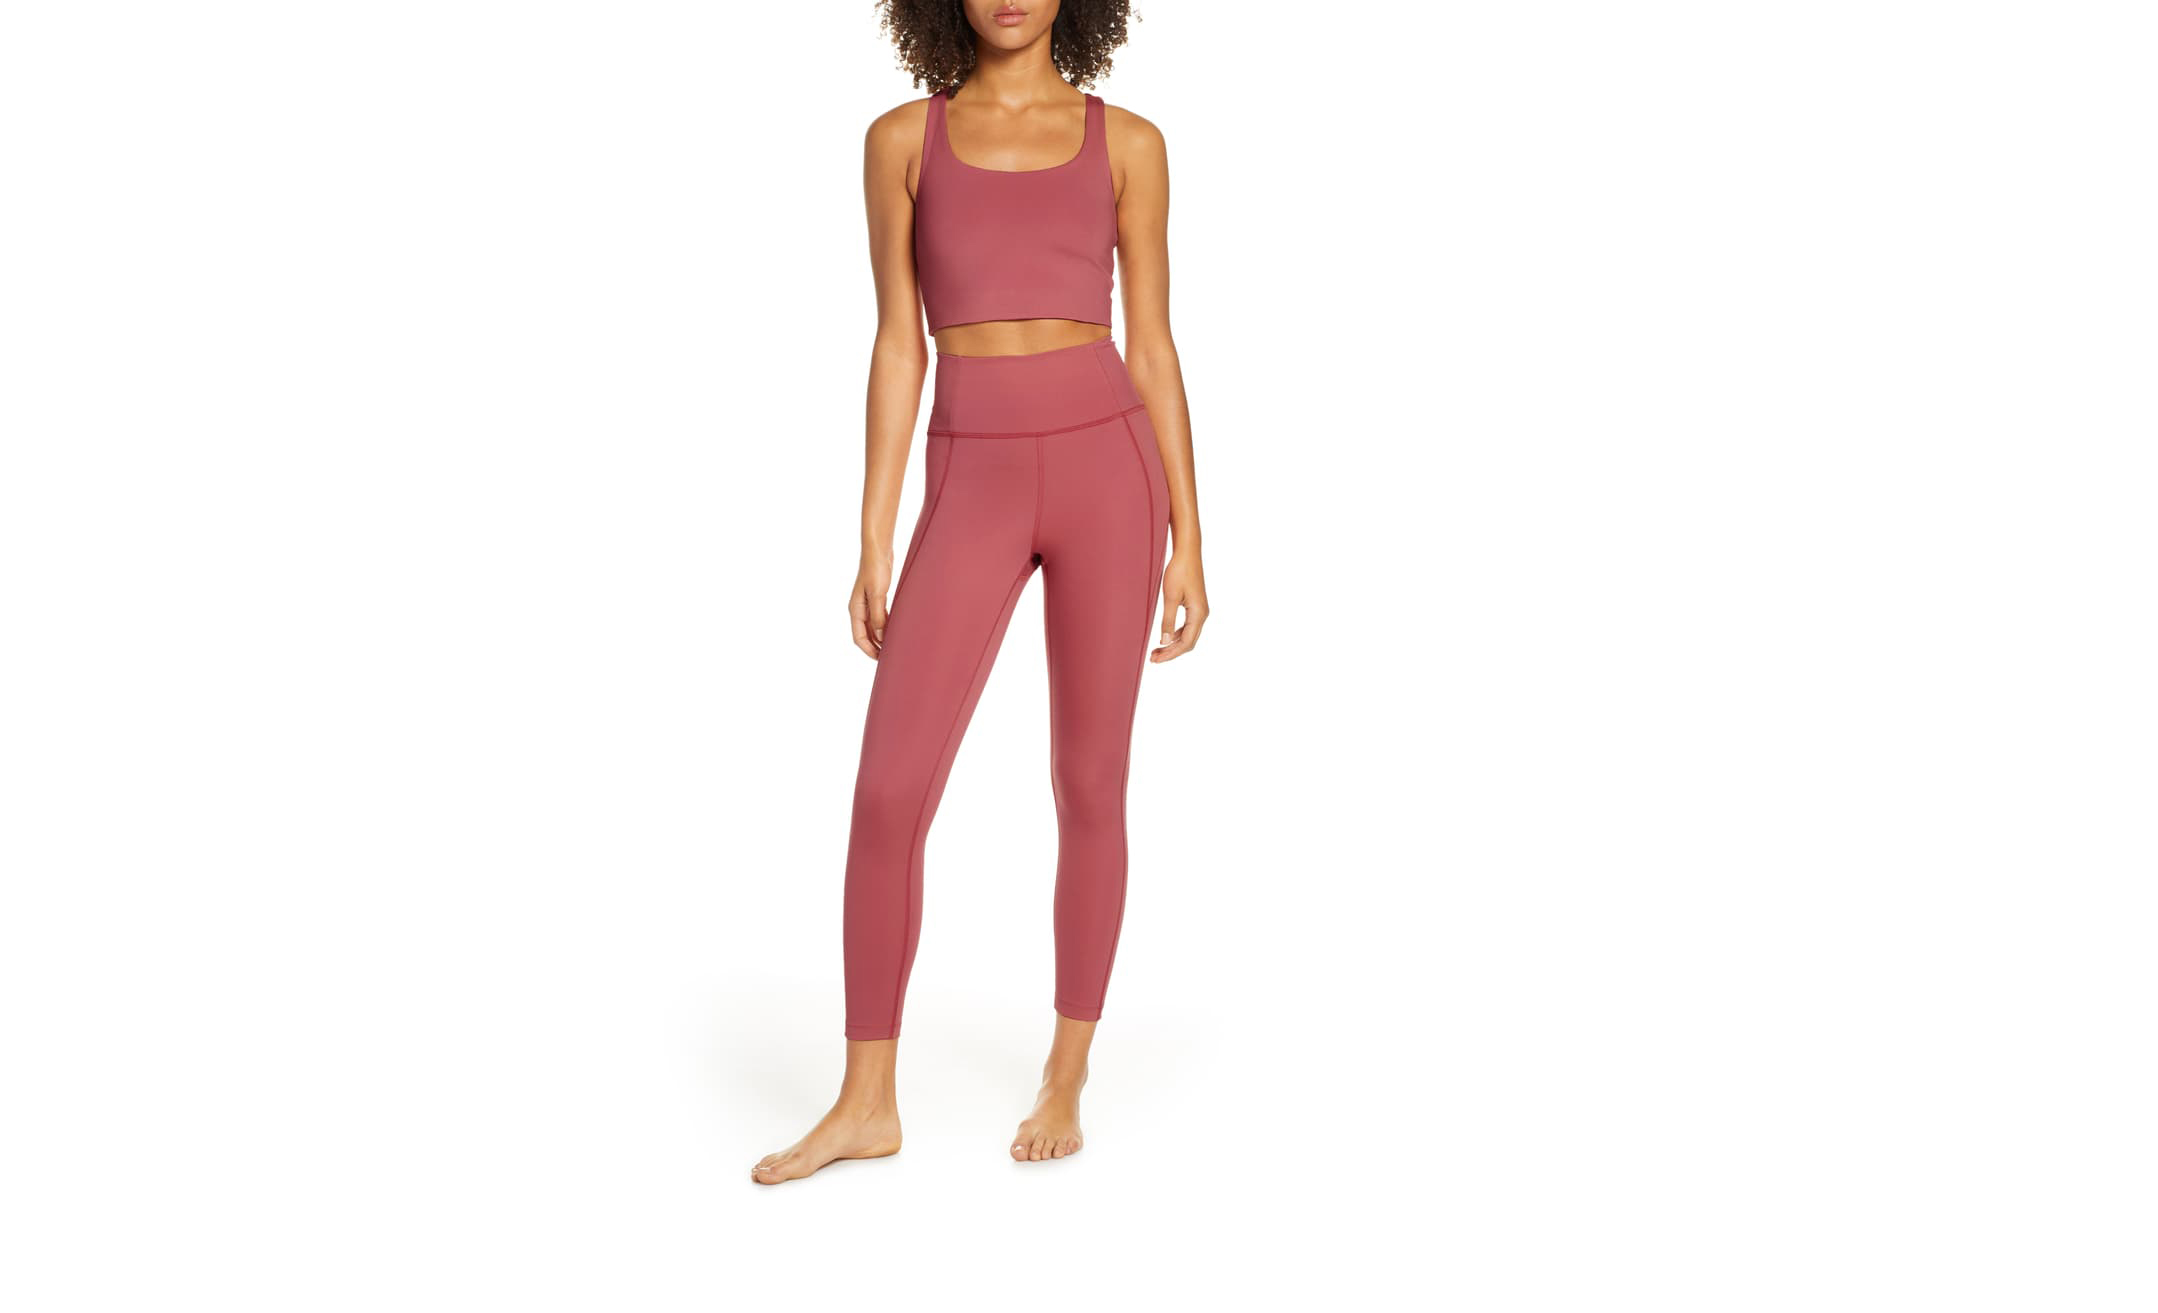 Girlfriend Workout Set Is the Perfect Athleisure Look